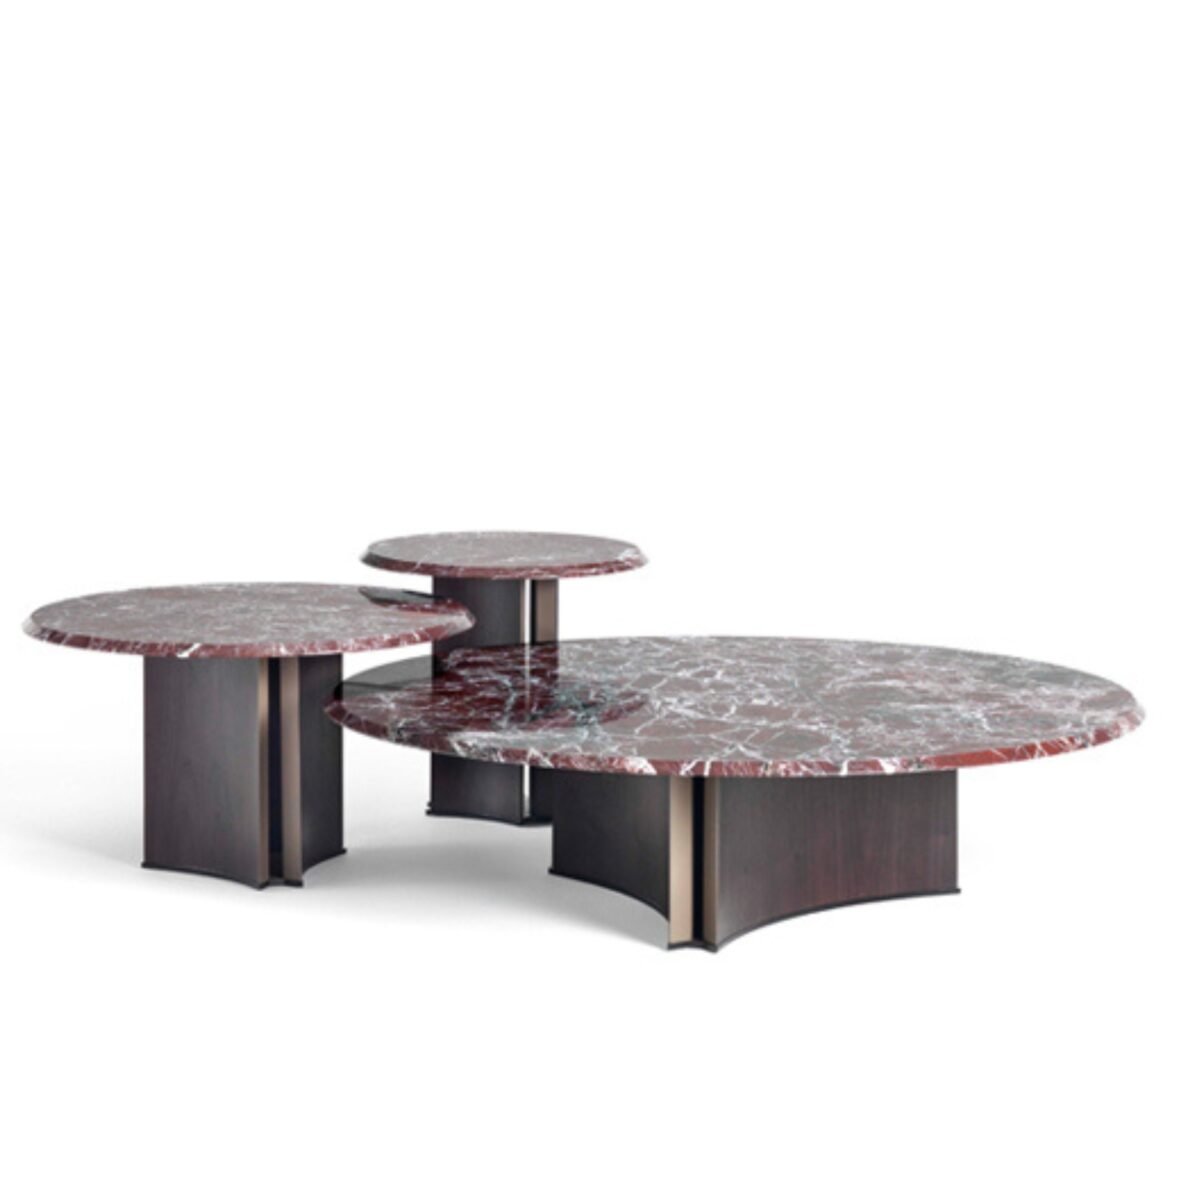 Ceppi the Italian Touch Clover small table